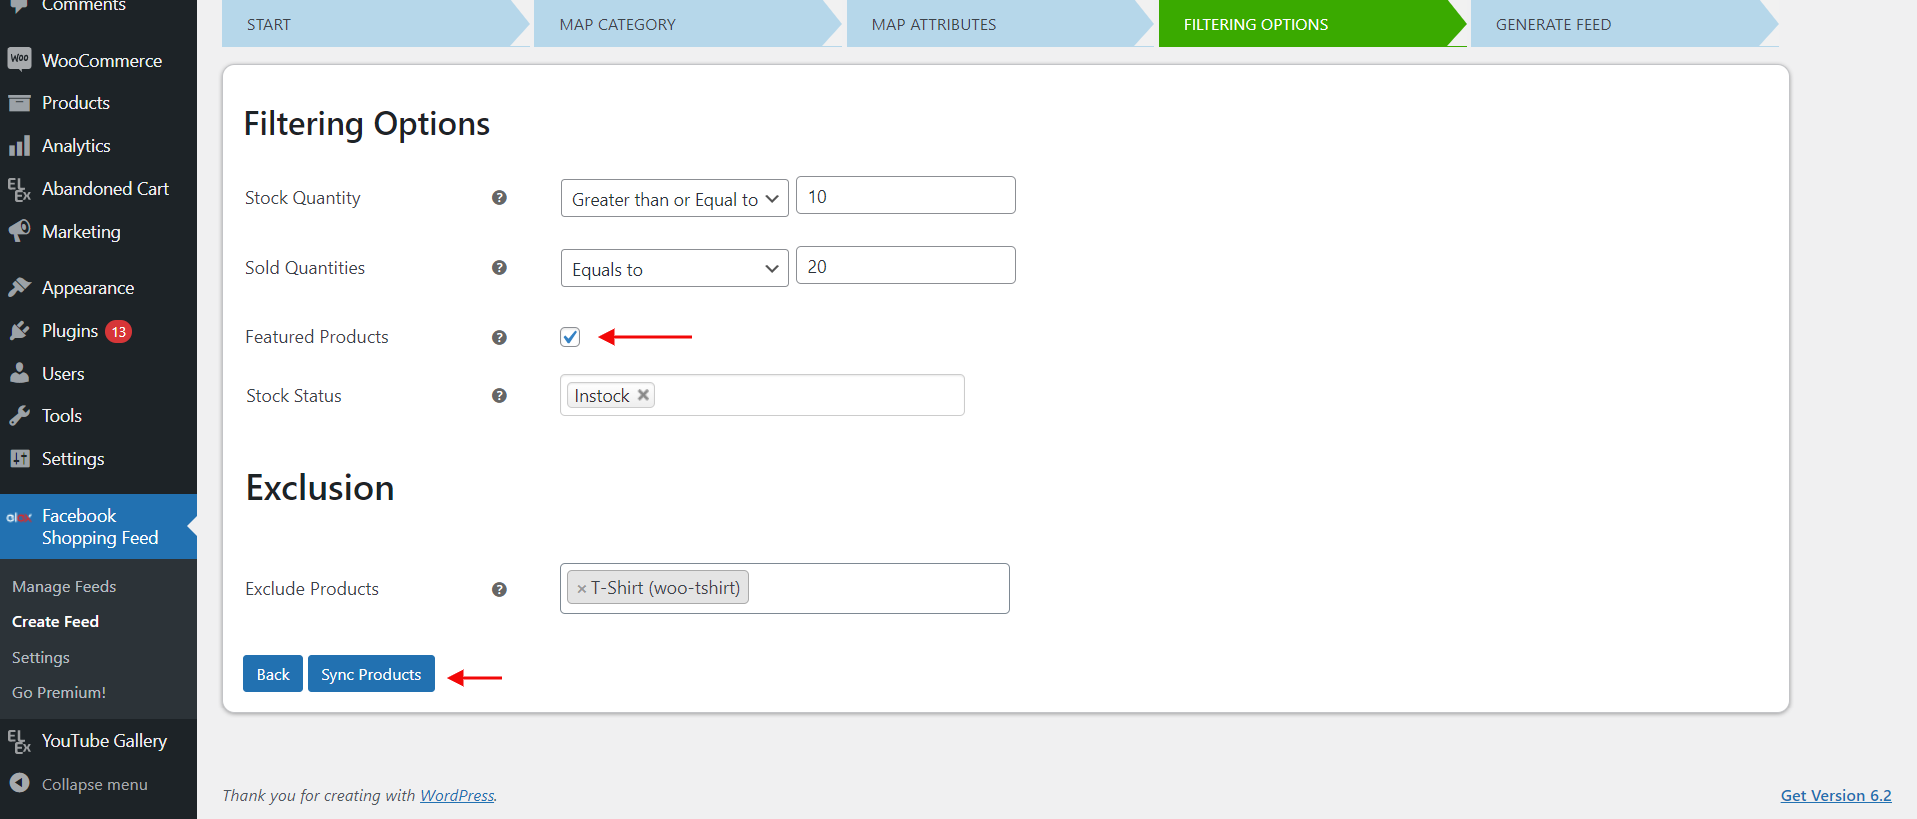 Filter out the stock and sold quantities of the products needed in the Filtering Options tab